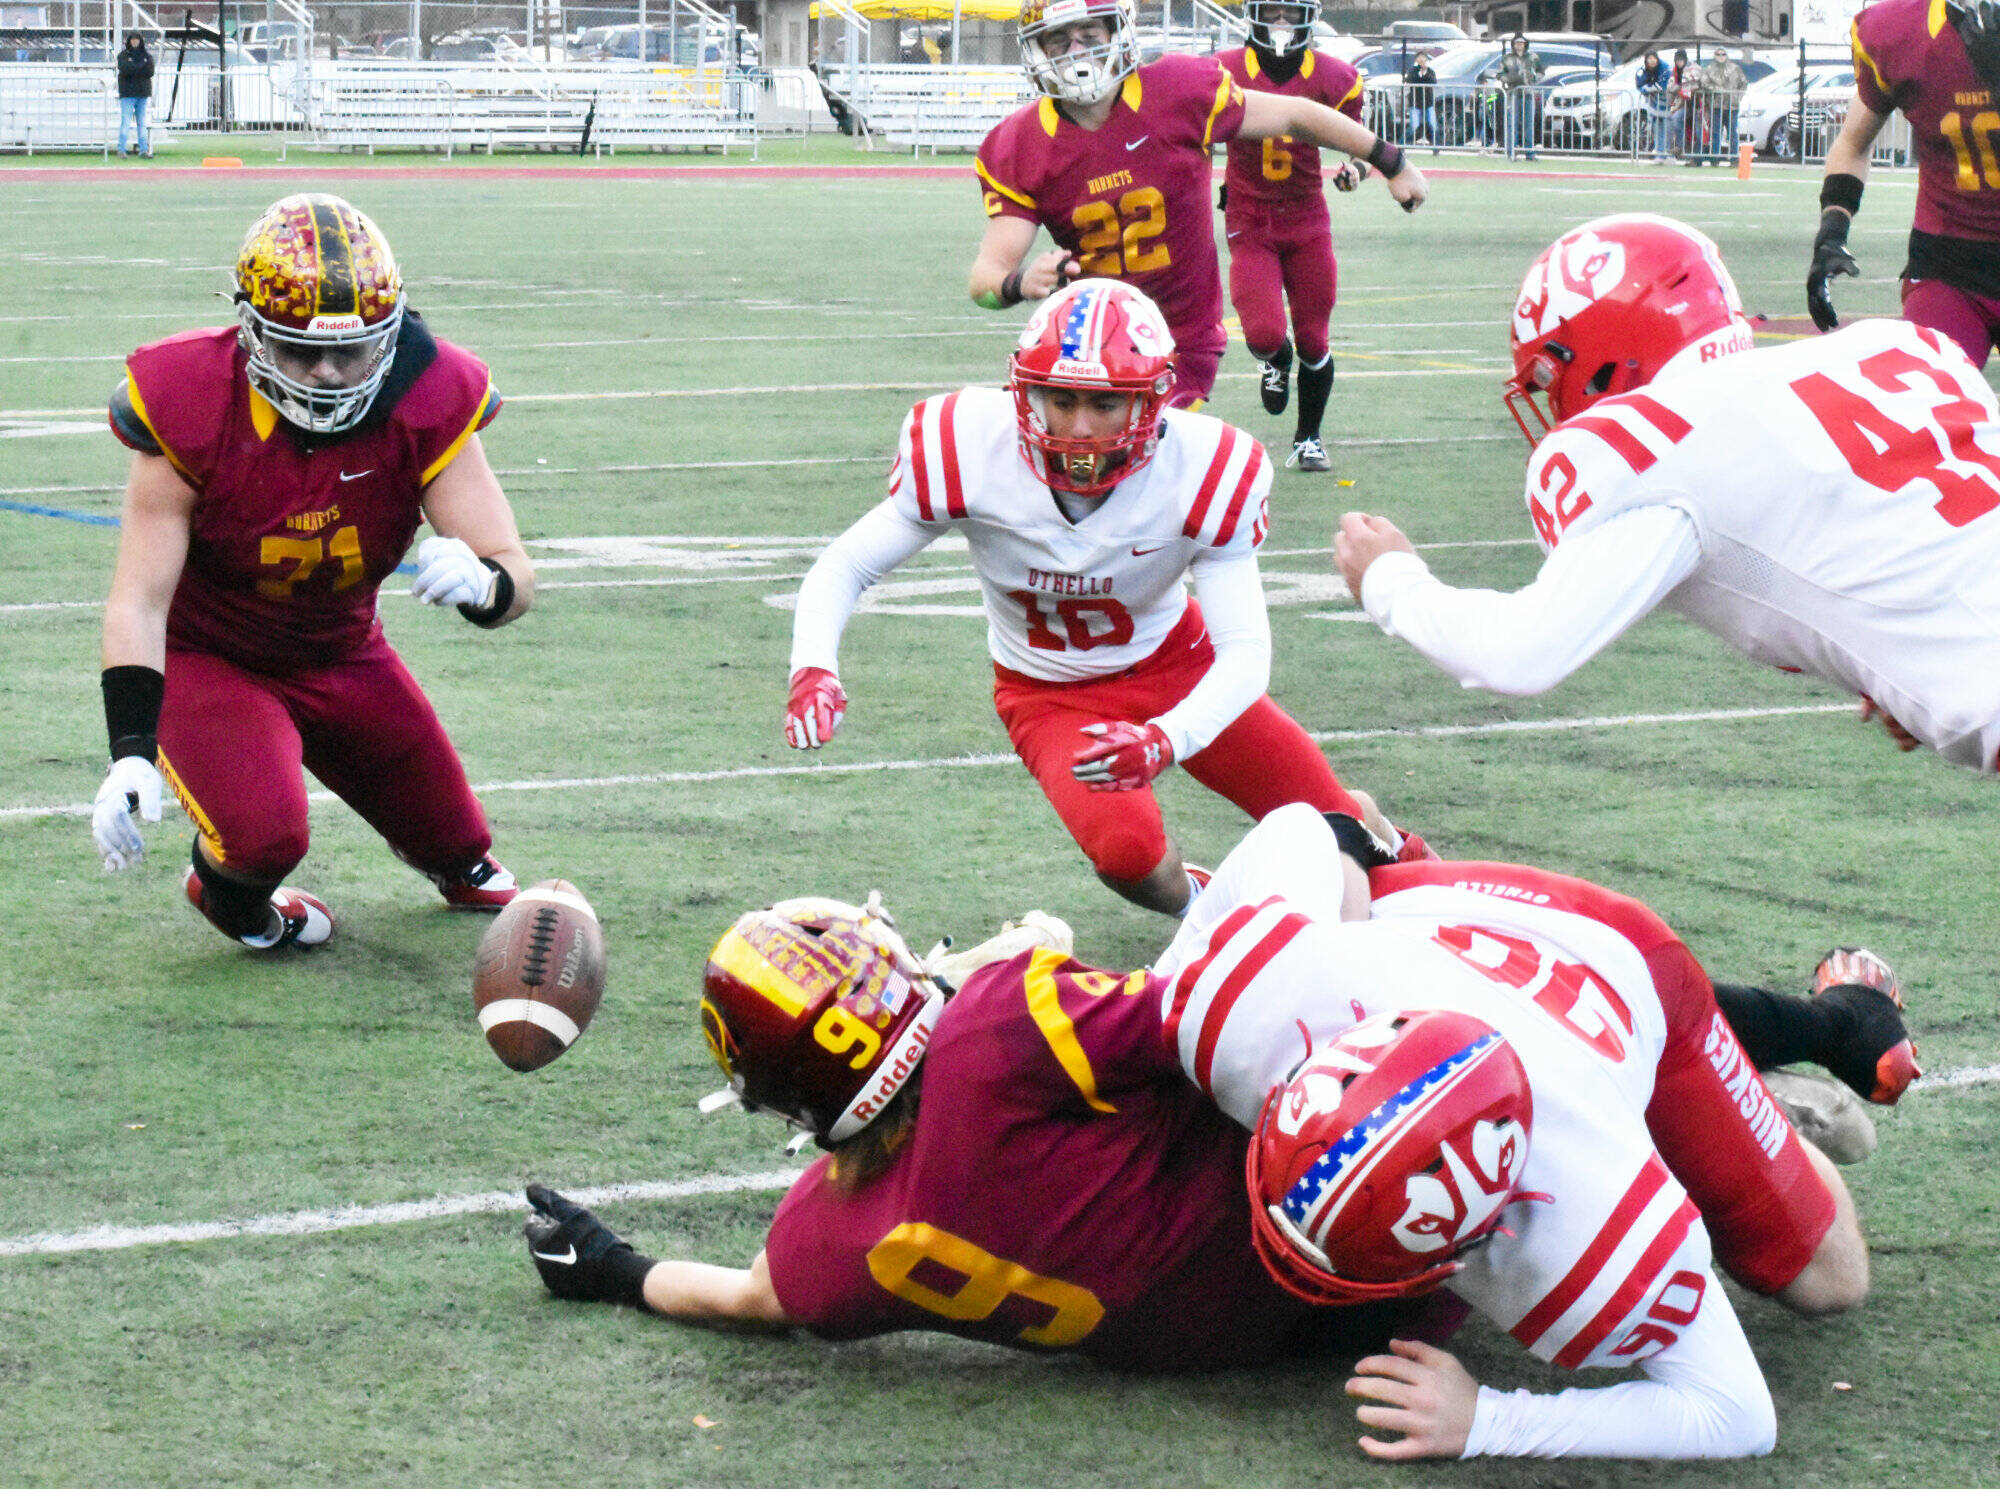 Photo by Kevin Hanson
Everything seemed to go Enumclaw’s way Saturday, even this EHS fumble that came on a kickoff return. There was a scramble for the loose ball, but Enumclaw made the recovery to retain possession.